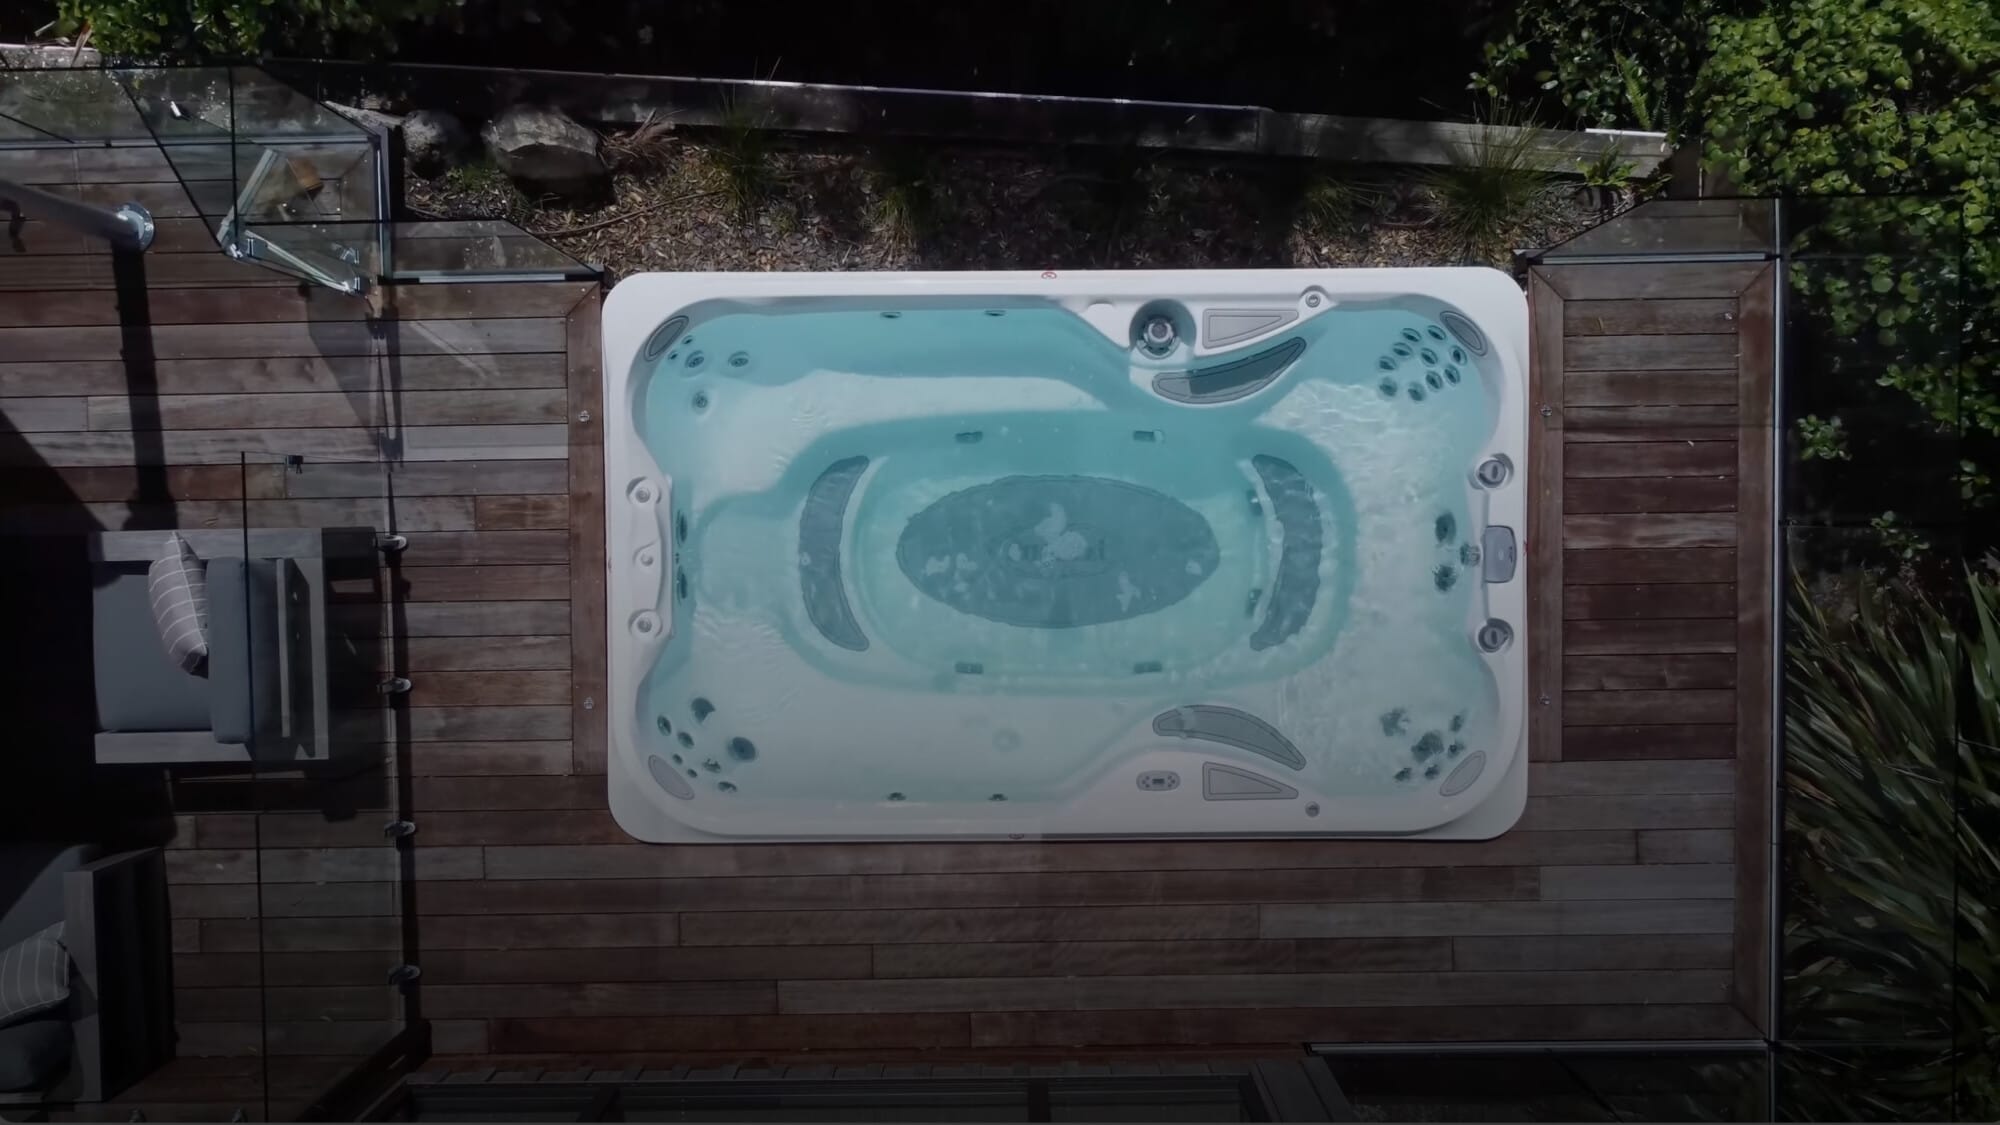 Introducing the Jacuzzi J-13 PowerPlay video